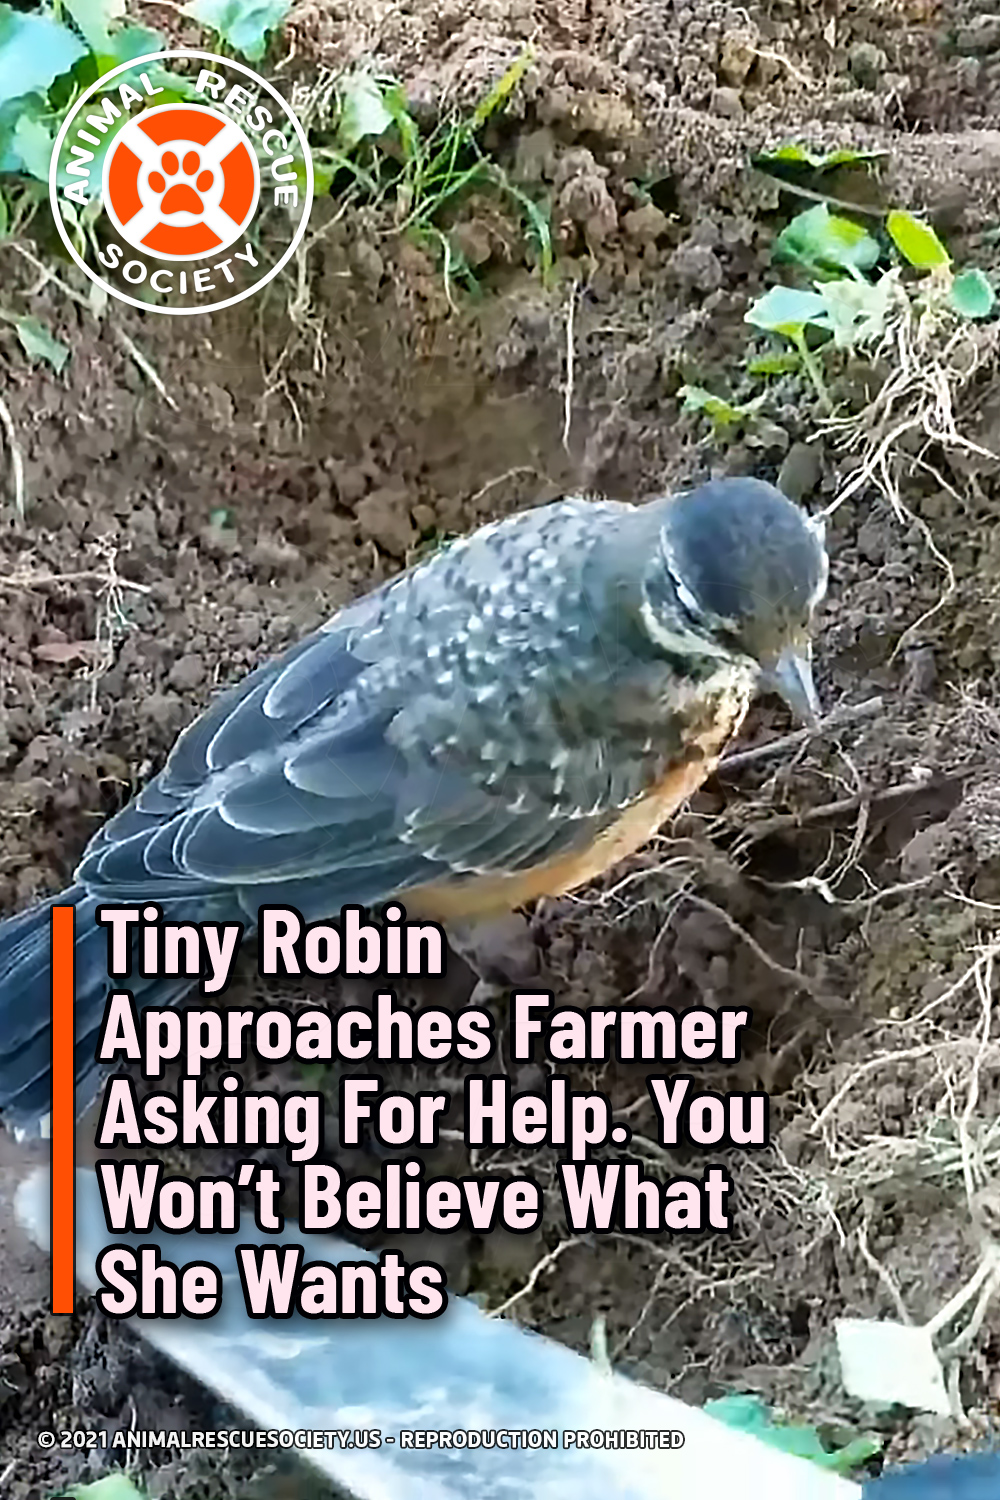 Tiny Robin Approaches Farmer Asking For Help. You Won’t Believe What She Wants